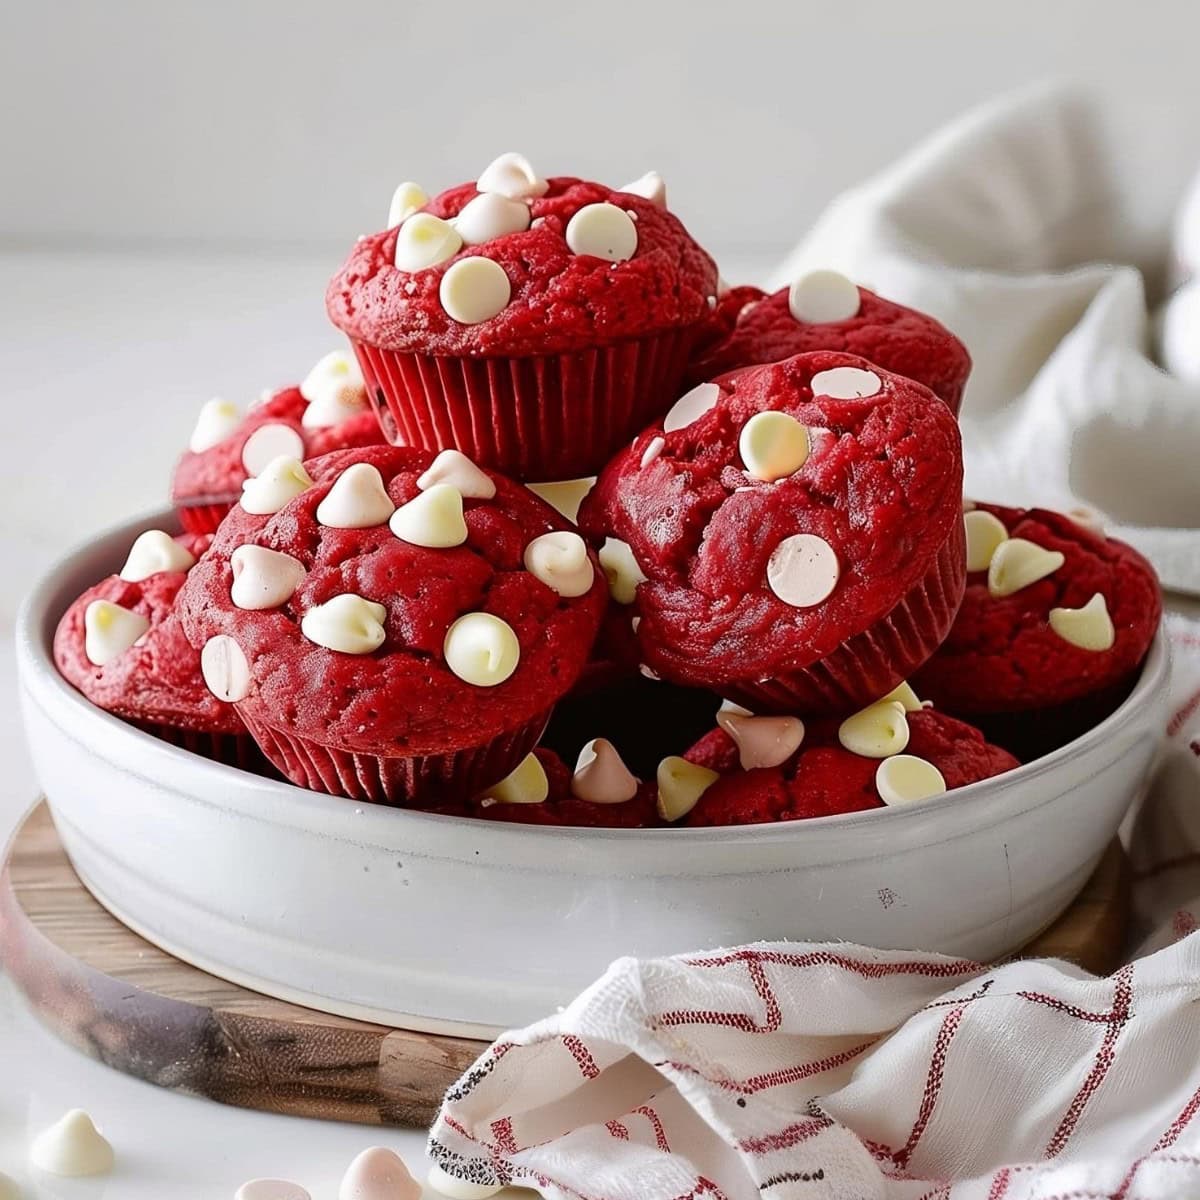 Bunch of red velvet muffins arranged in a shallow bowl.